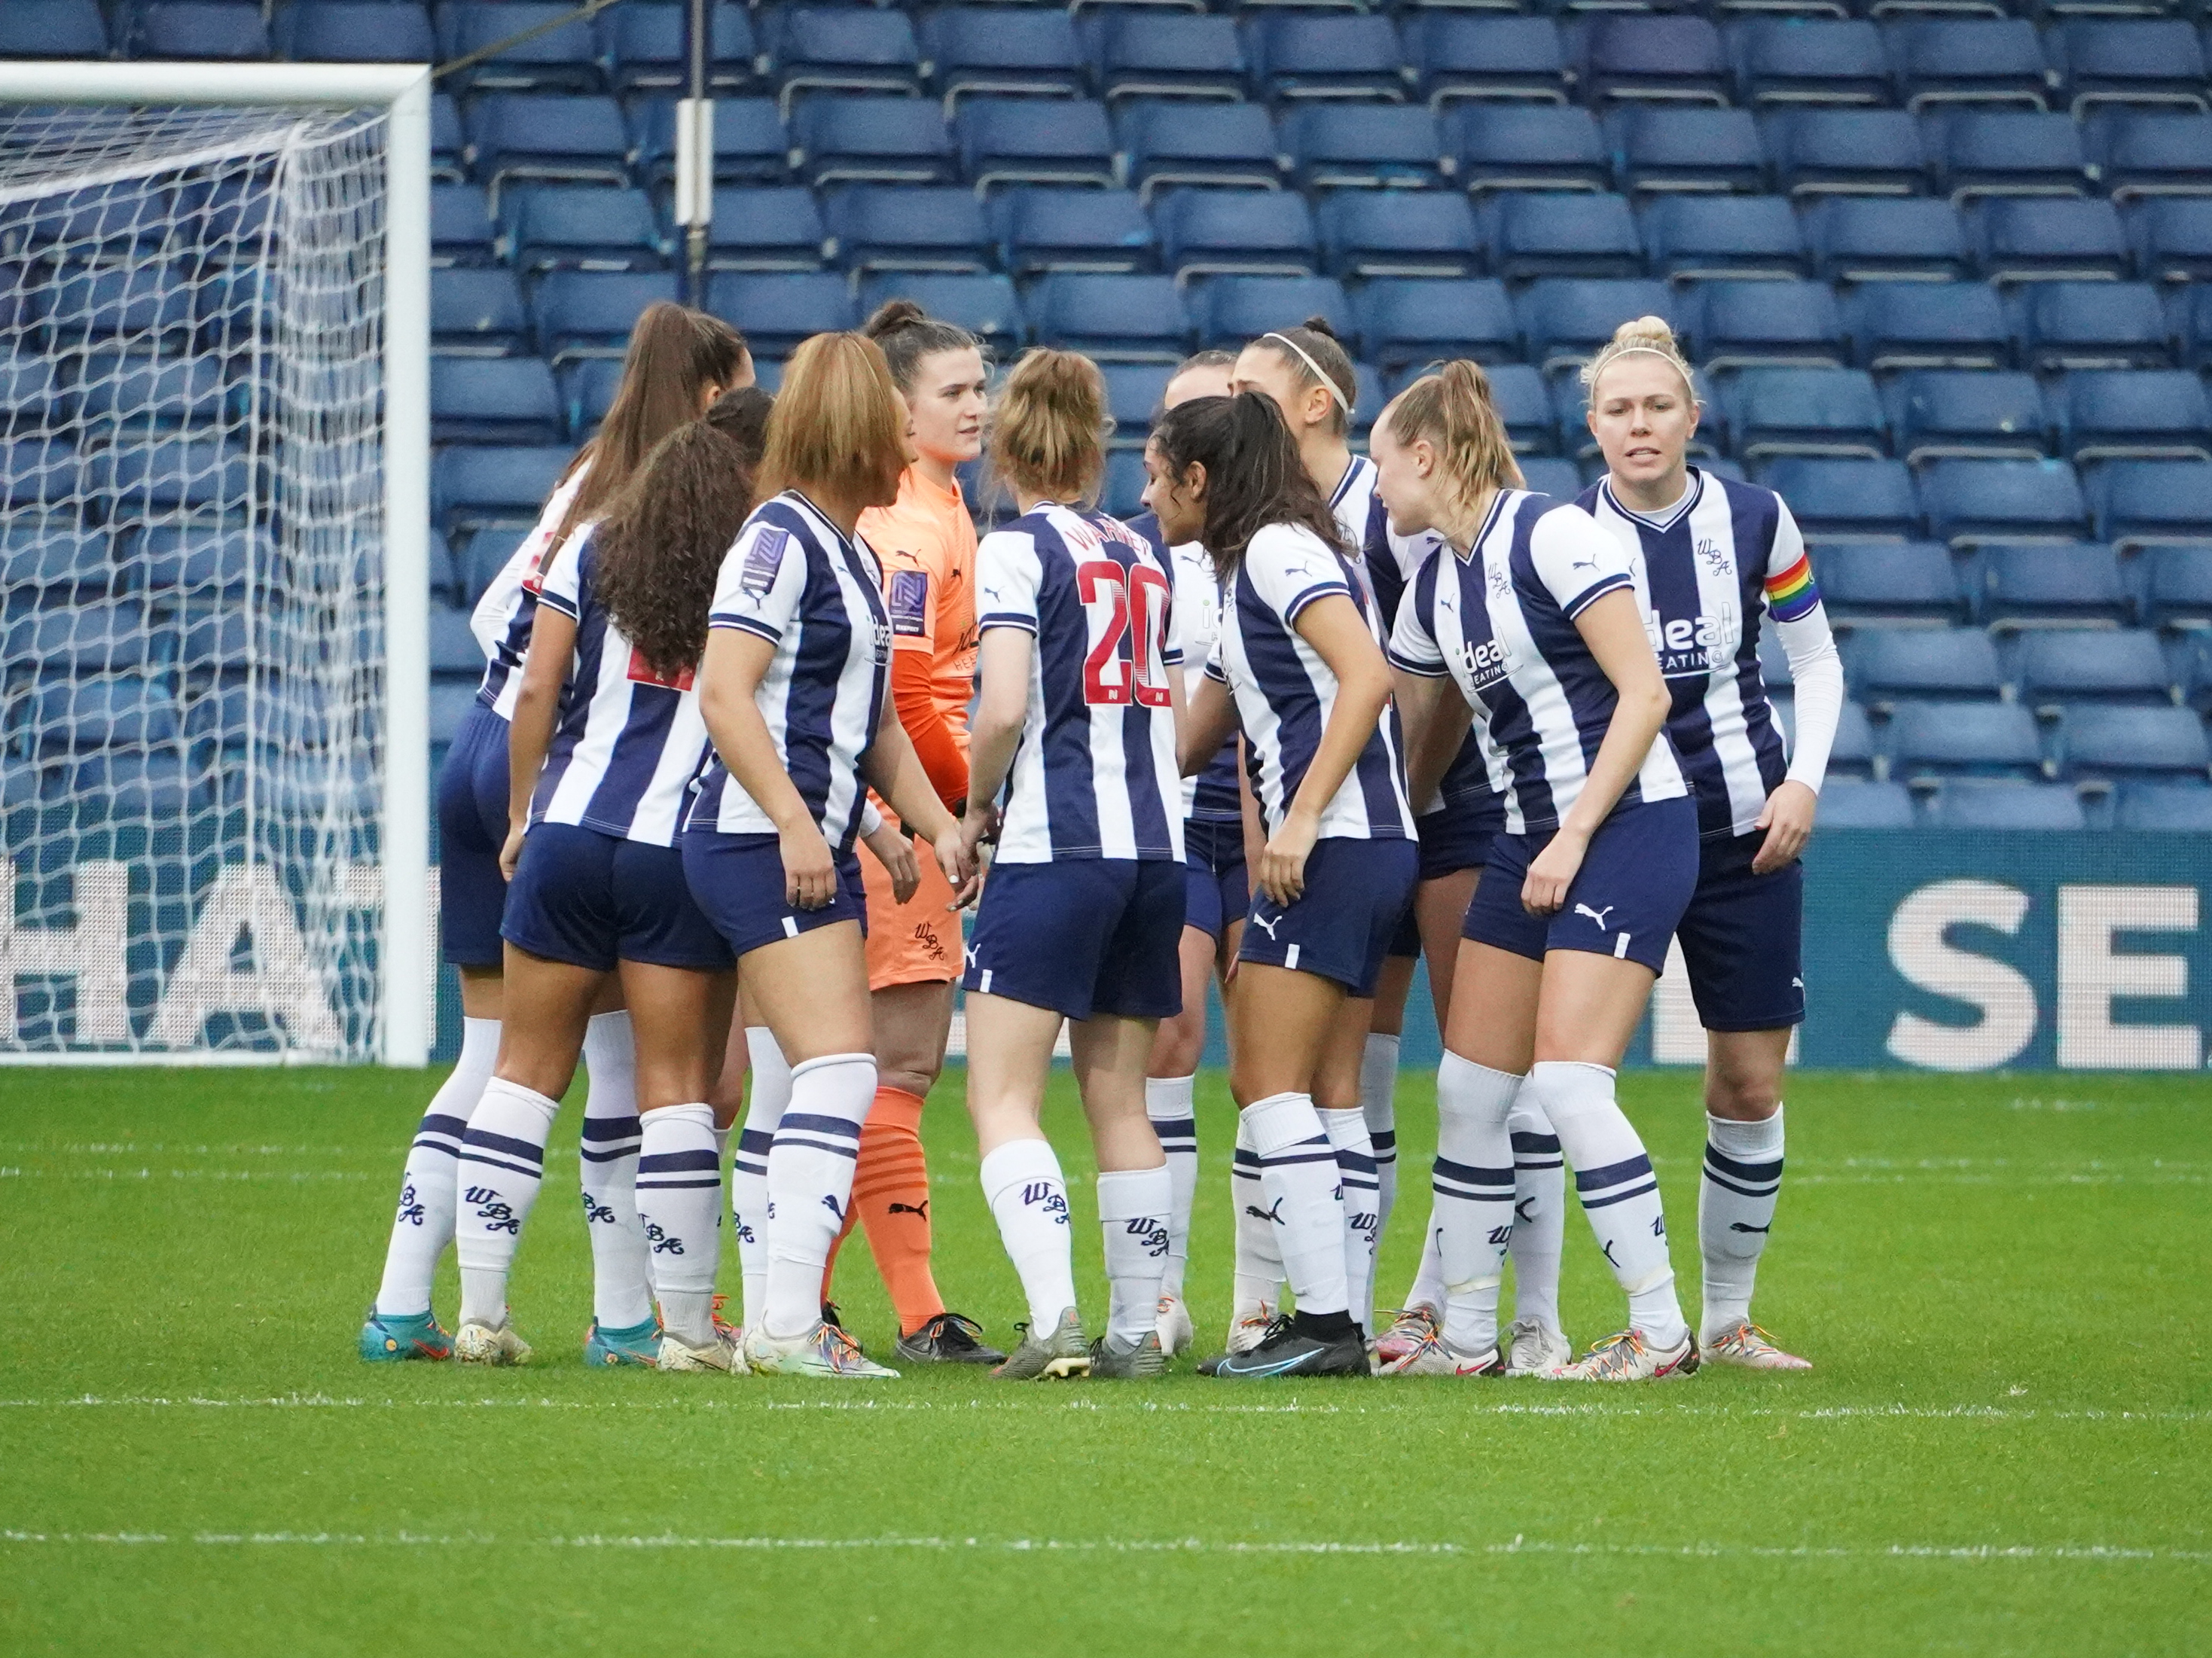 An image of the Albion Women's team in a huddle